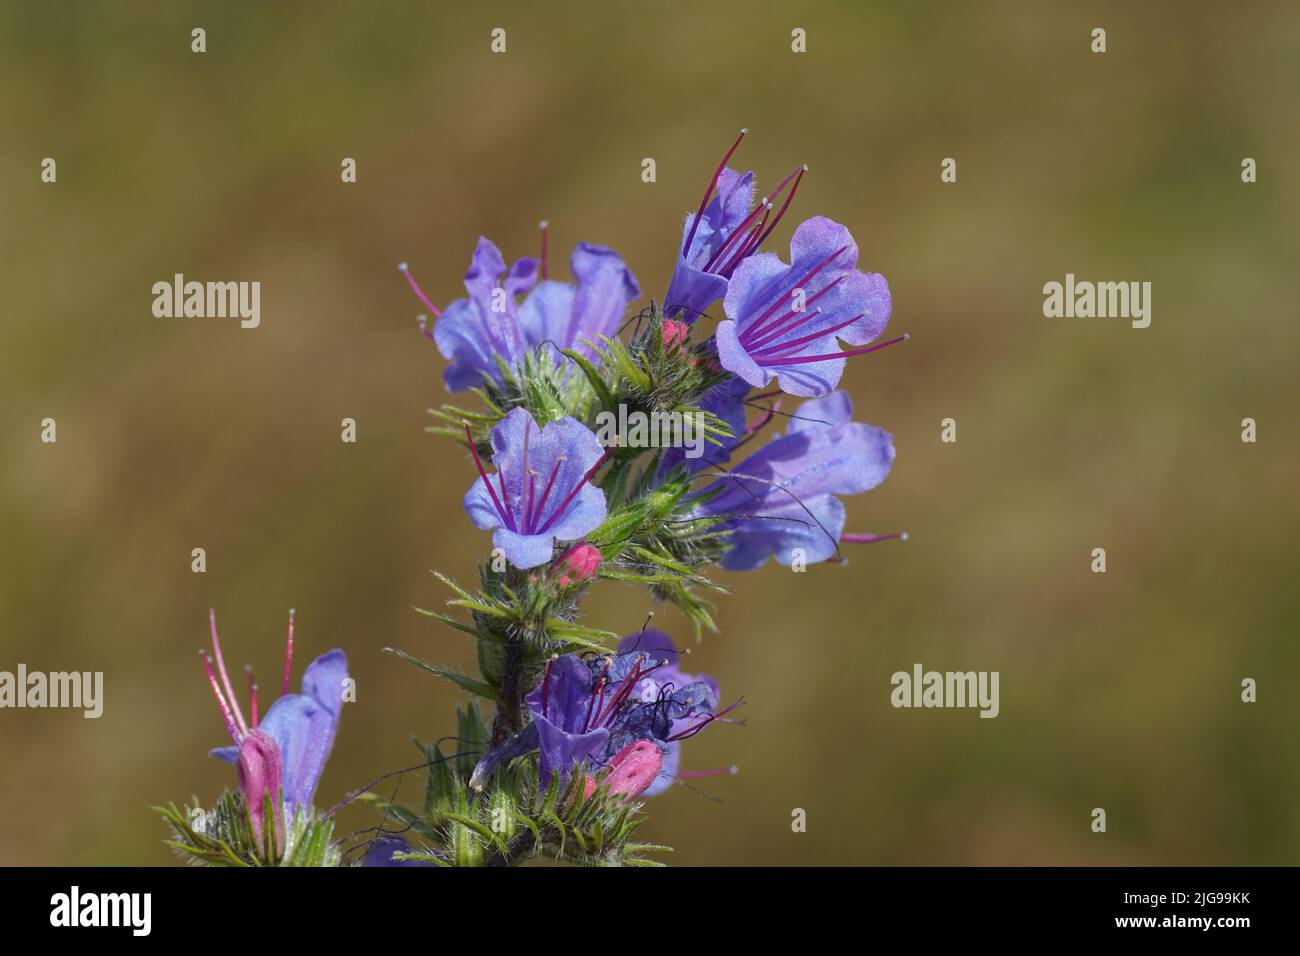 Close up flowering viper's bugloss, blueweed (Echium vulgare) of the borage family Boraginaceae. Blurred tall grass on the background. July, Stock Photo